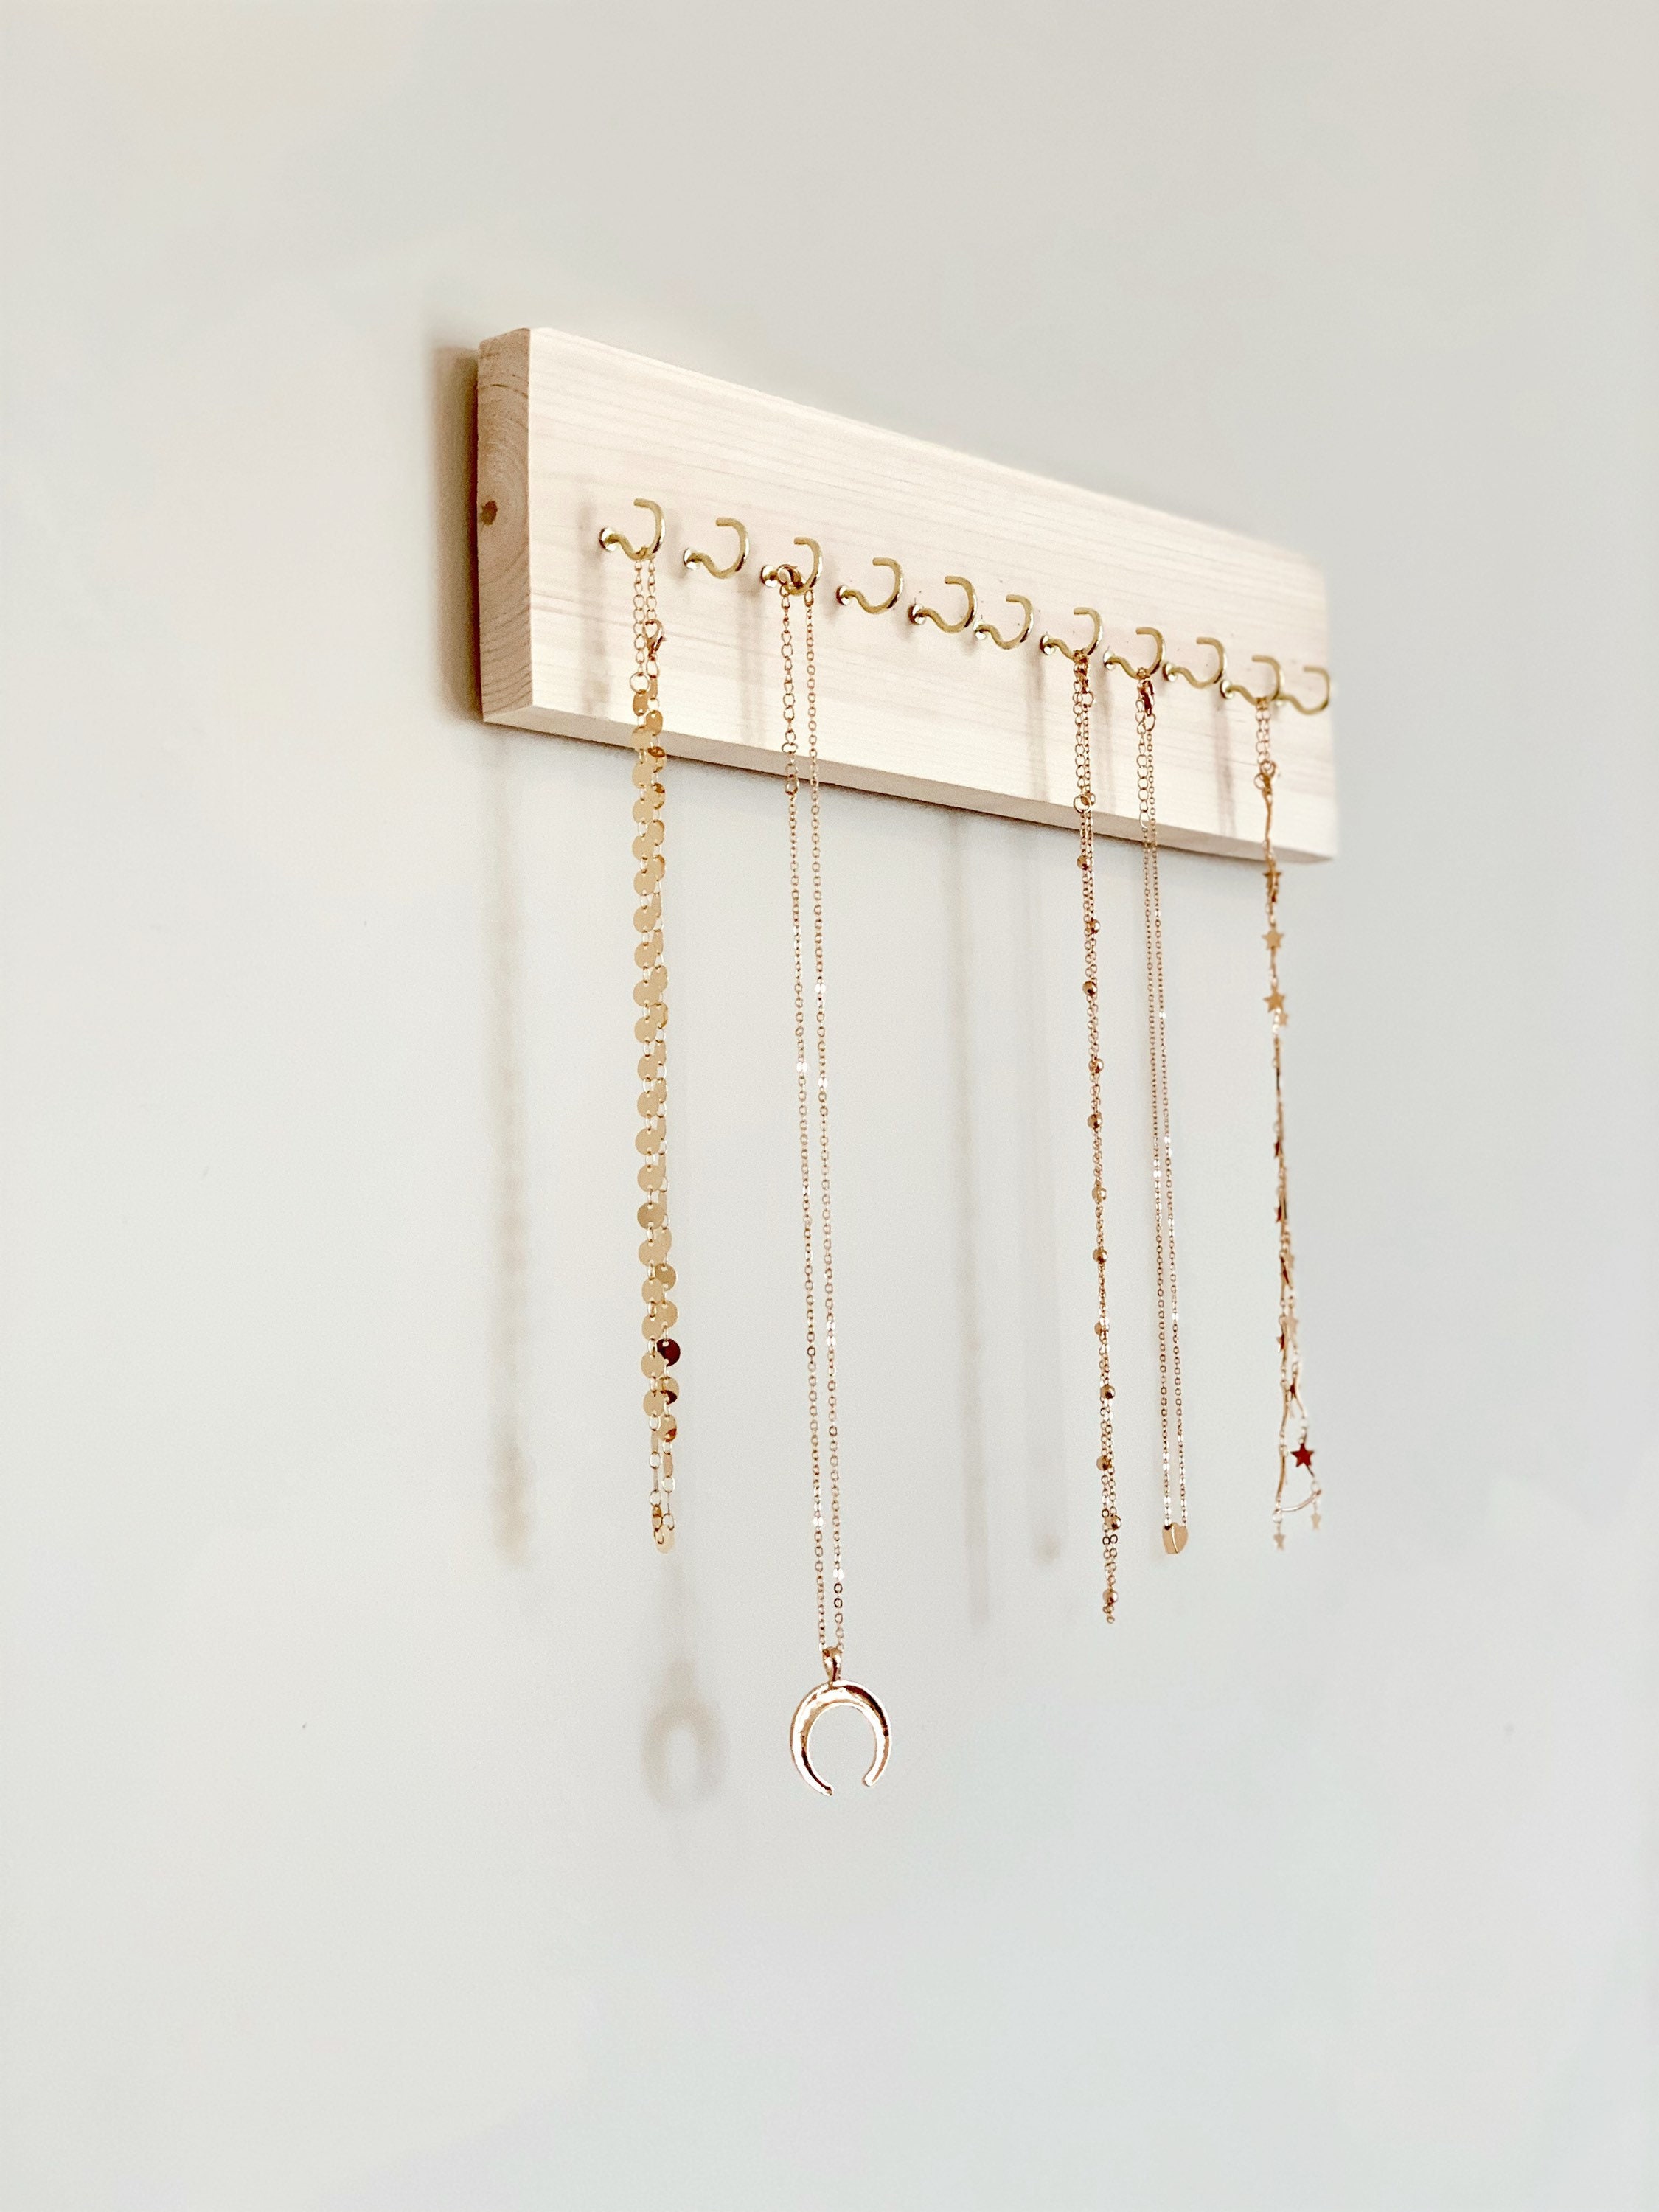 Wall Necklace Holder Hanging Jewelry Organizer Wall Jewlery Hanger Wood  Jewelry Storage Necklace Hanger With Hooks 